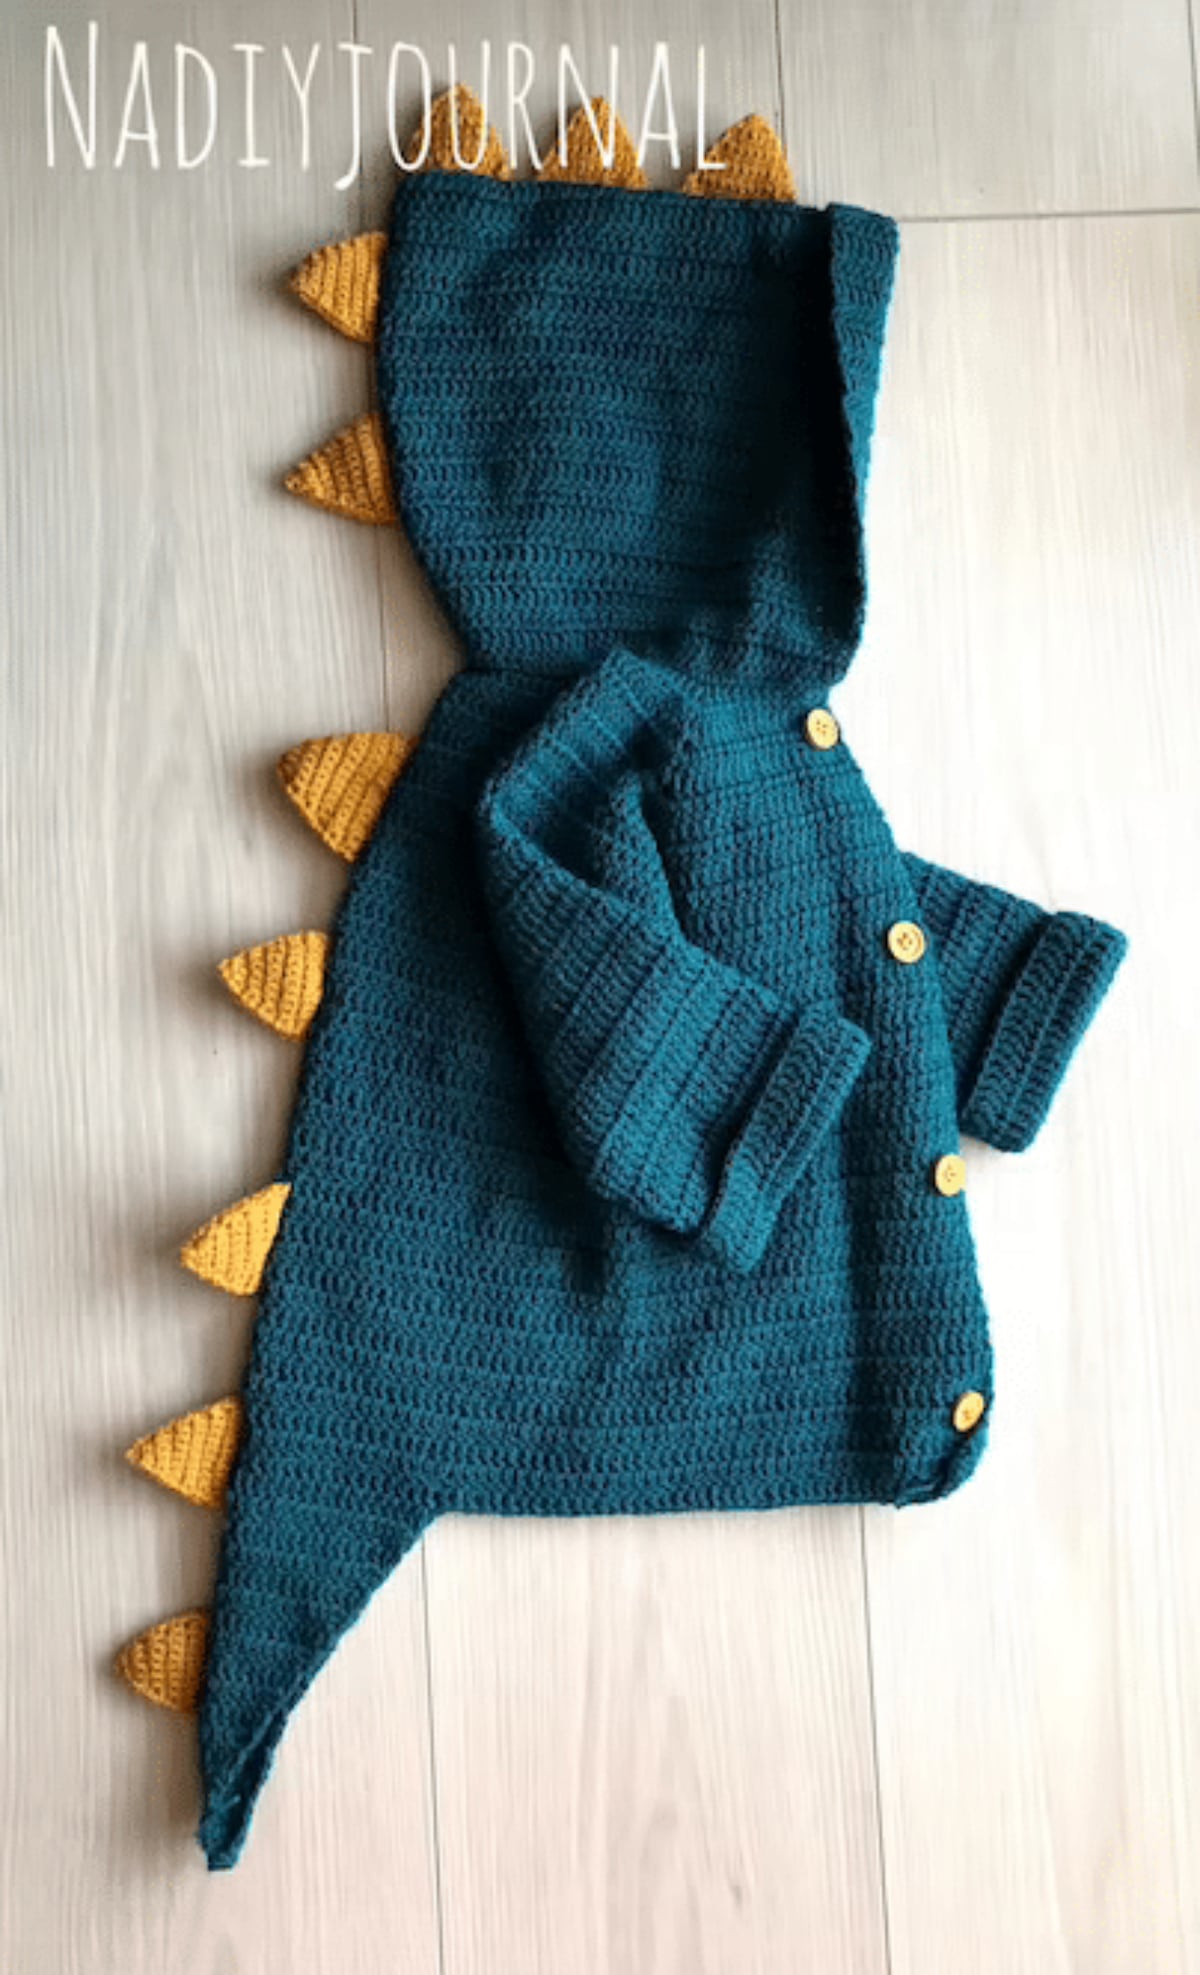 Small teal crochet cardigan with long sleeves, buttons down the center and yellow dinosaur spikes down the hood, back, and tail at the bottom.